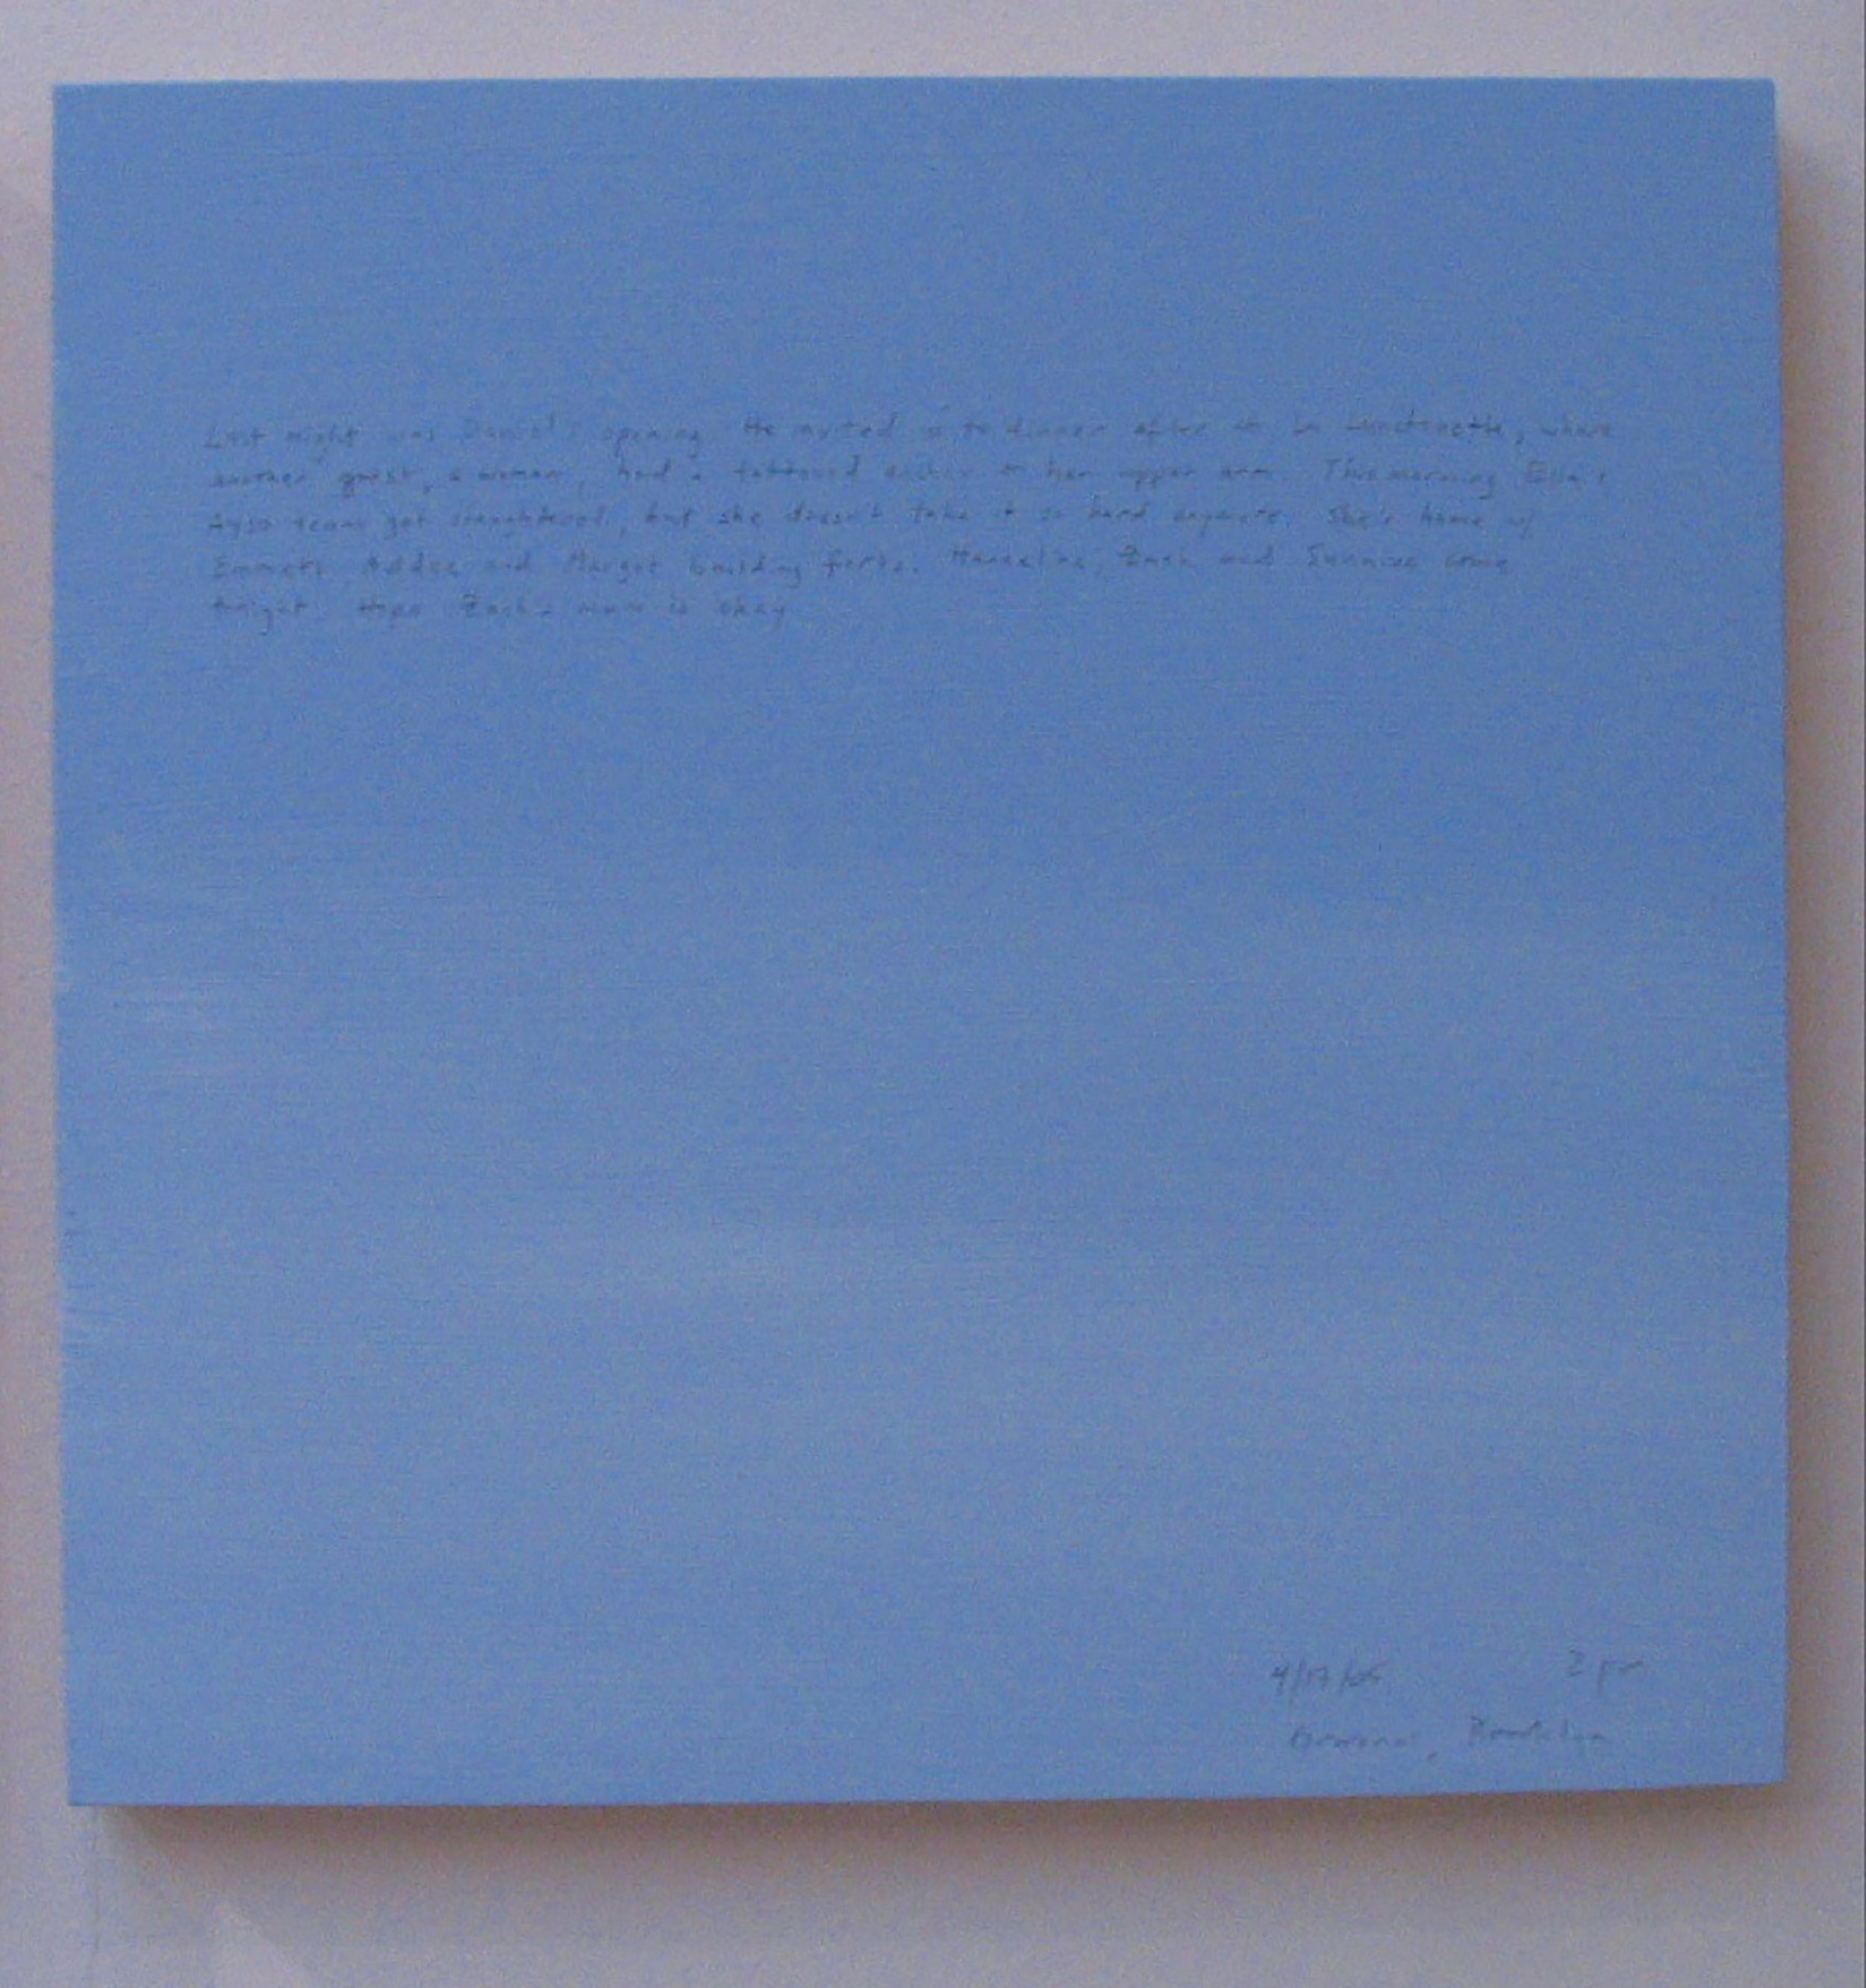 A 14 × 14 inch, acrylic painting of the sky. A journal entry is handwritten on the painting:

“Last night was Daniel’s opening. He invited us to dinner after at La Lunchonette, where another guest, a woman, had a tattooed anchor on her upper arm. This morning Ella’s AYSO team got slaughtered, but she doesn’t take it so hard anymore. She’s home w/ Emmett, Addee and Margot building forts. Hanneline, Zach and Sunniva come tonight. Hope Zach’s mom is okay.  

4/17/05 2 pm
Gowanus, Brooklyn”